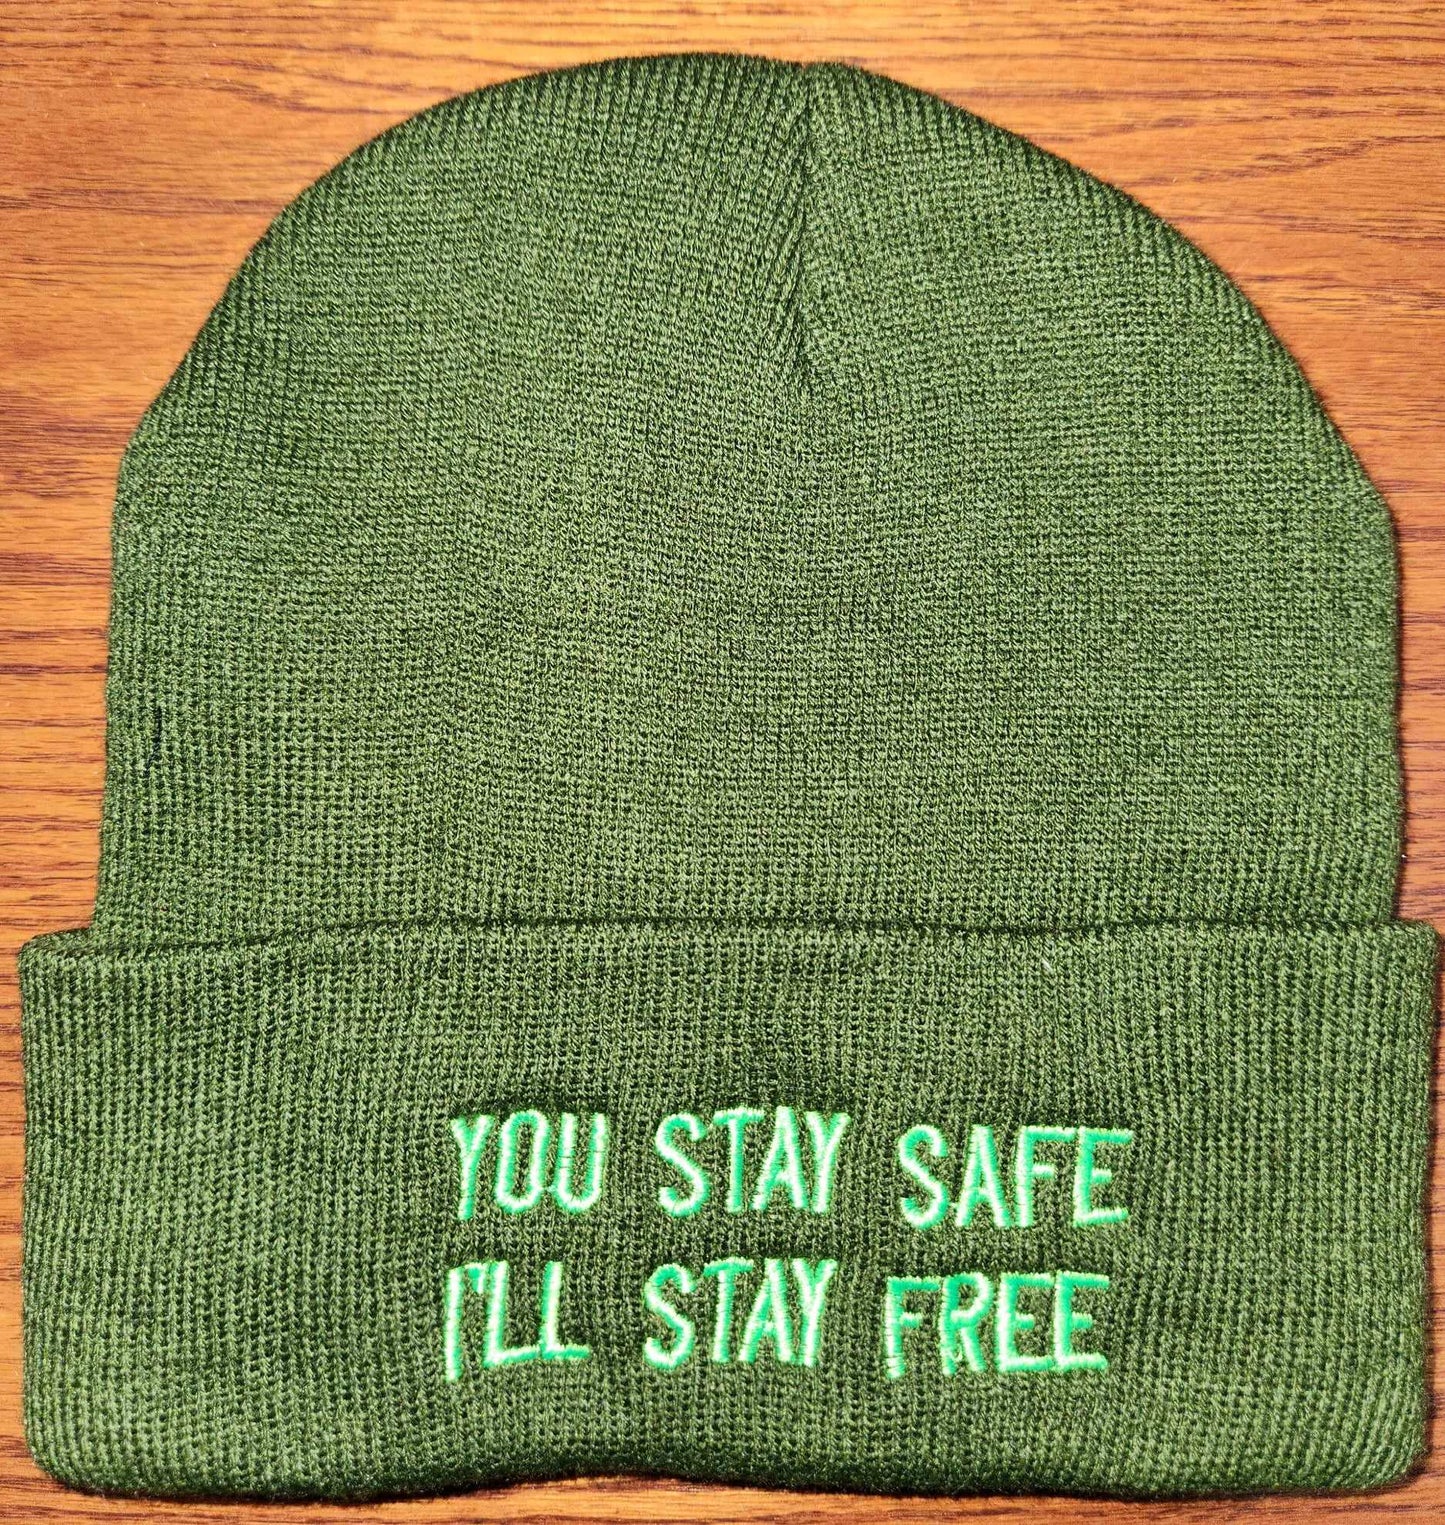 You Stay Safe I Stay Free Toques and Caps (Custom Order)